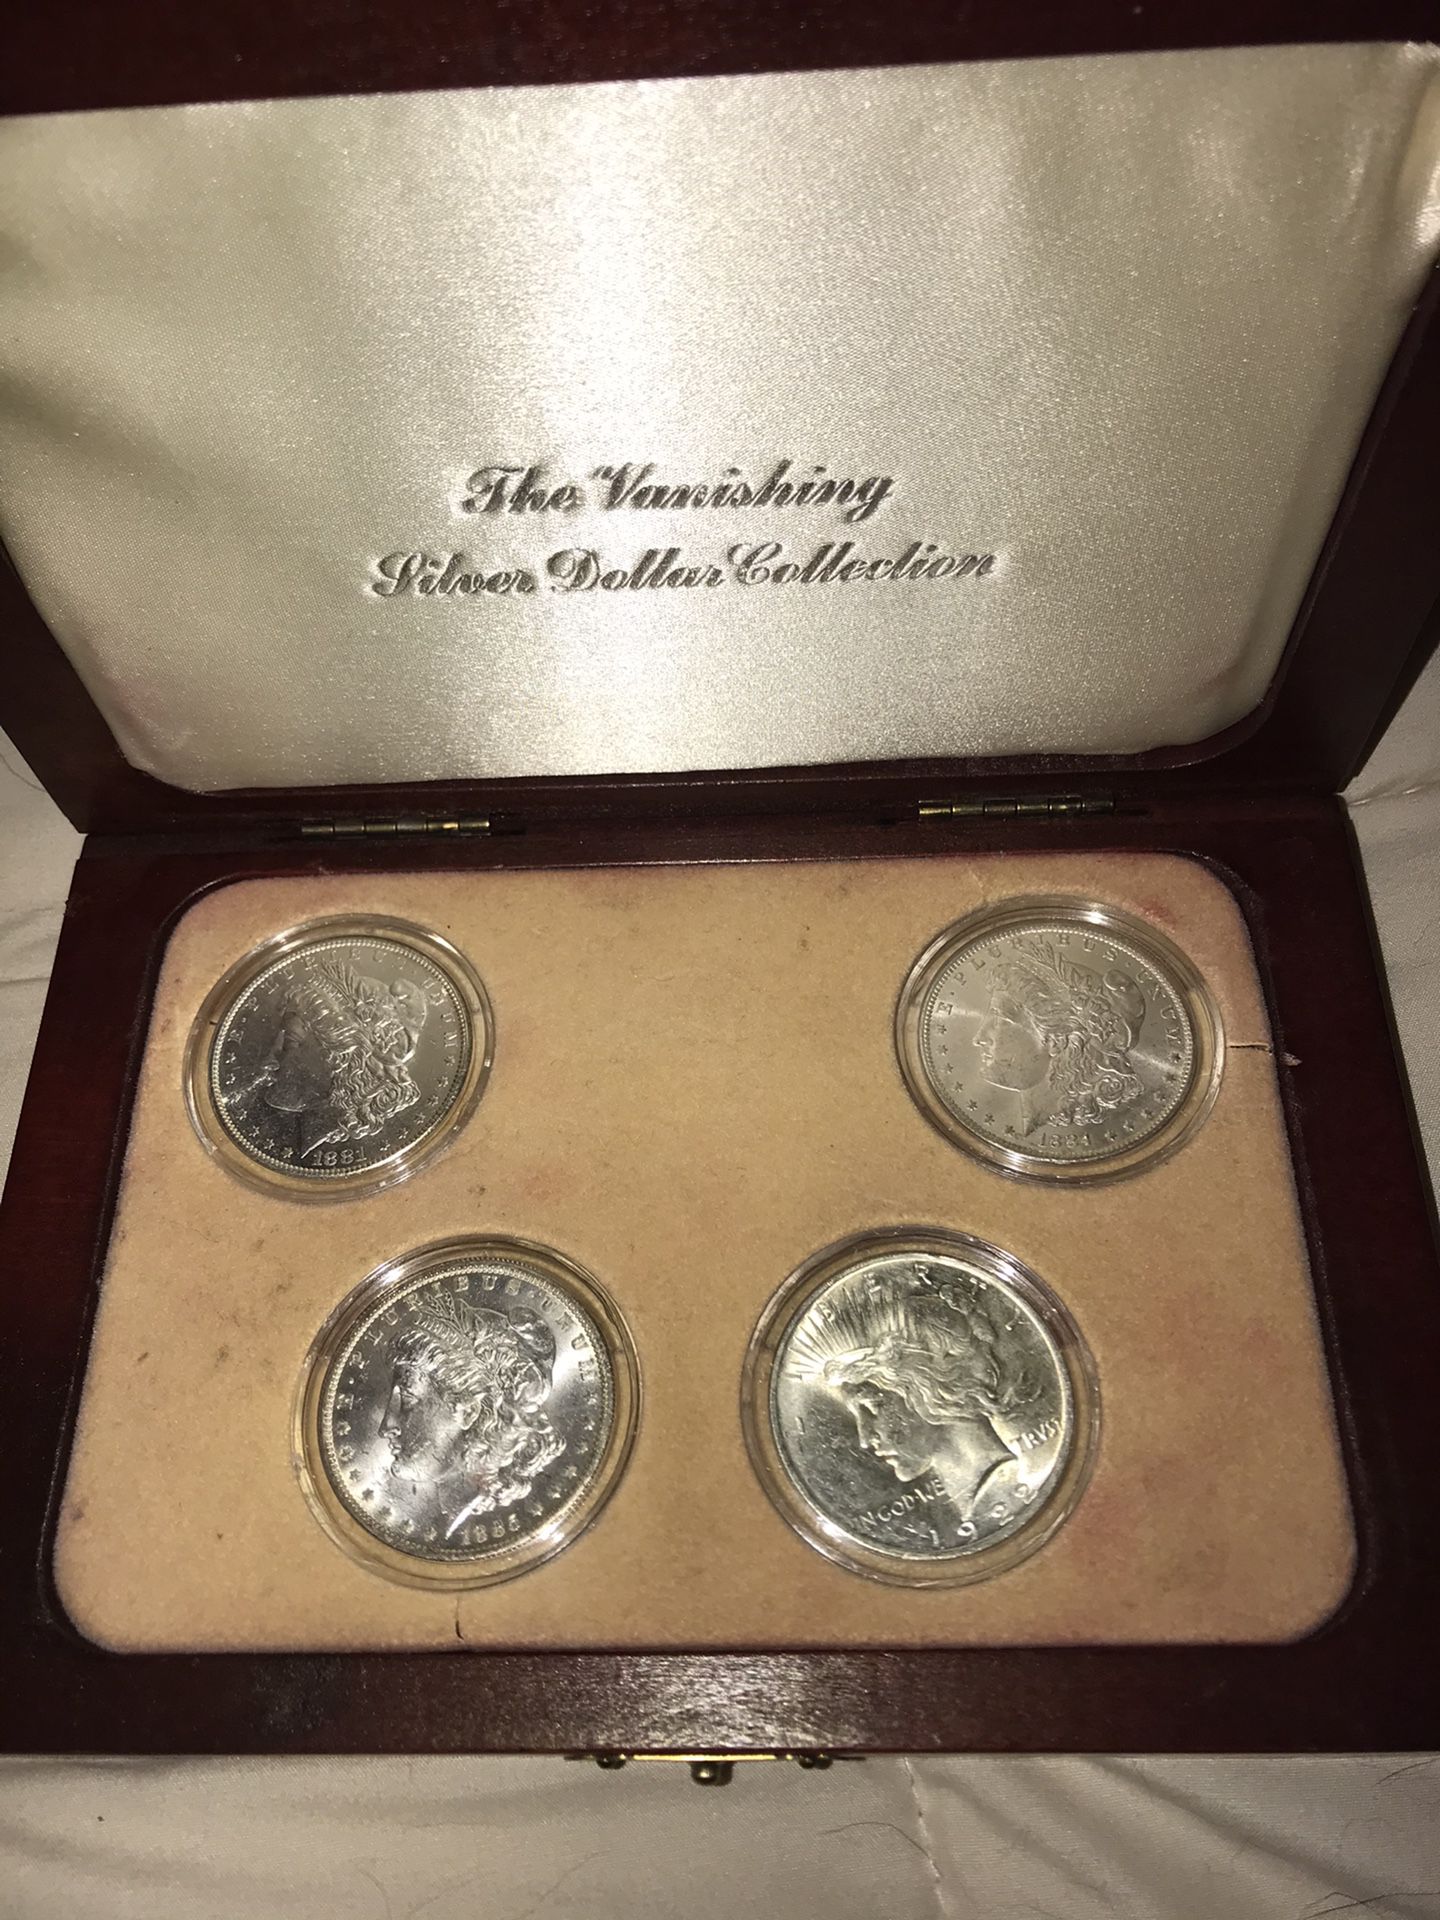 The vanishing silver dollar collection